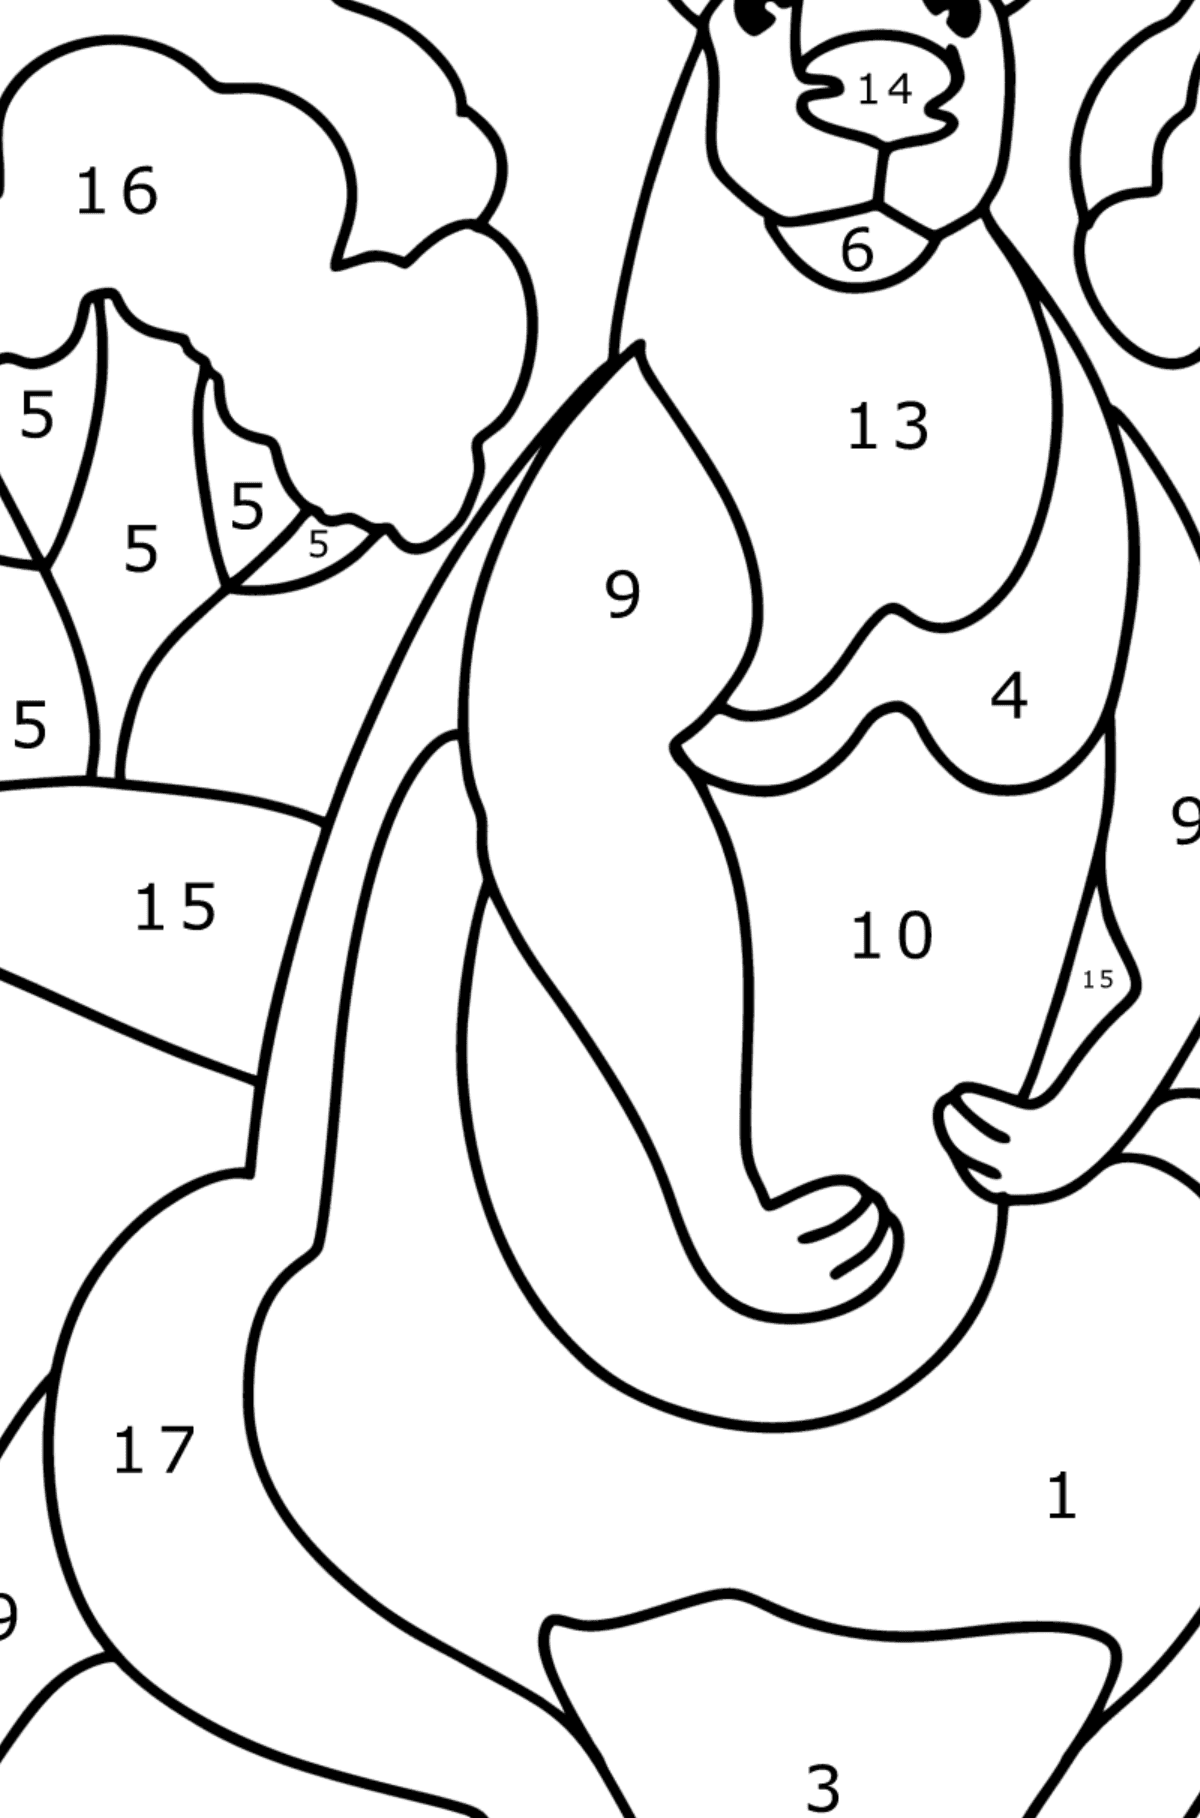 Giant Kangaroo coloring page - Coloring by Numbers for Kids